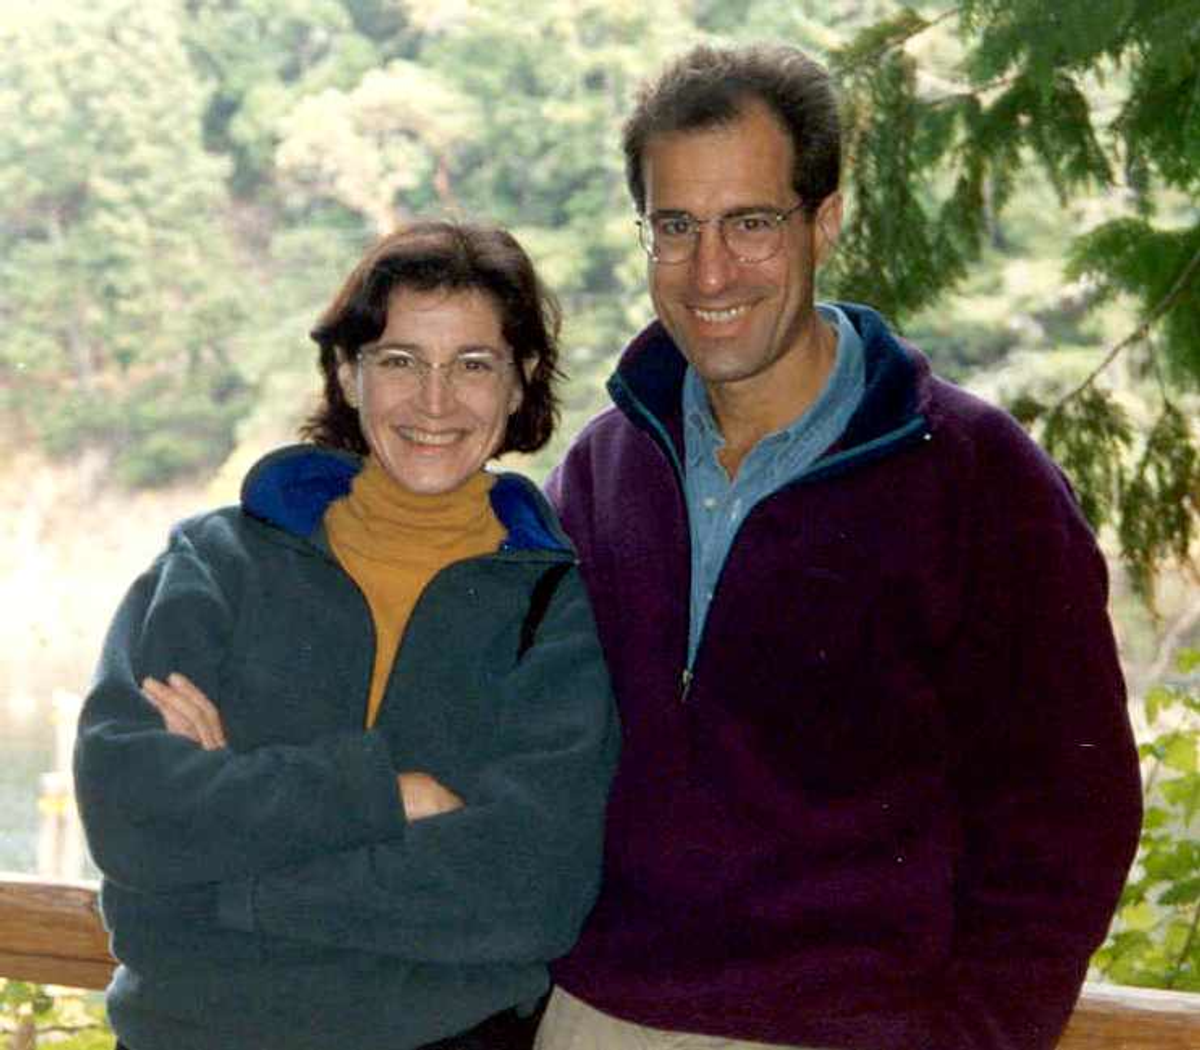 The author and her husband in 1997